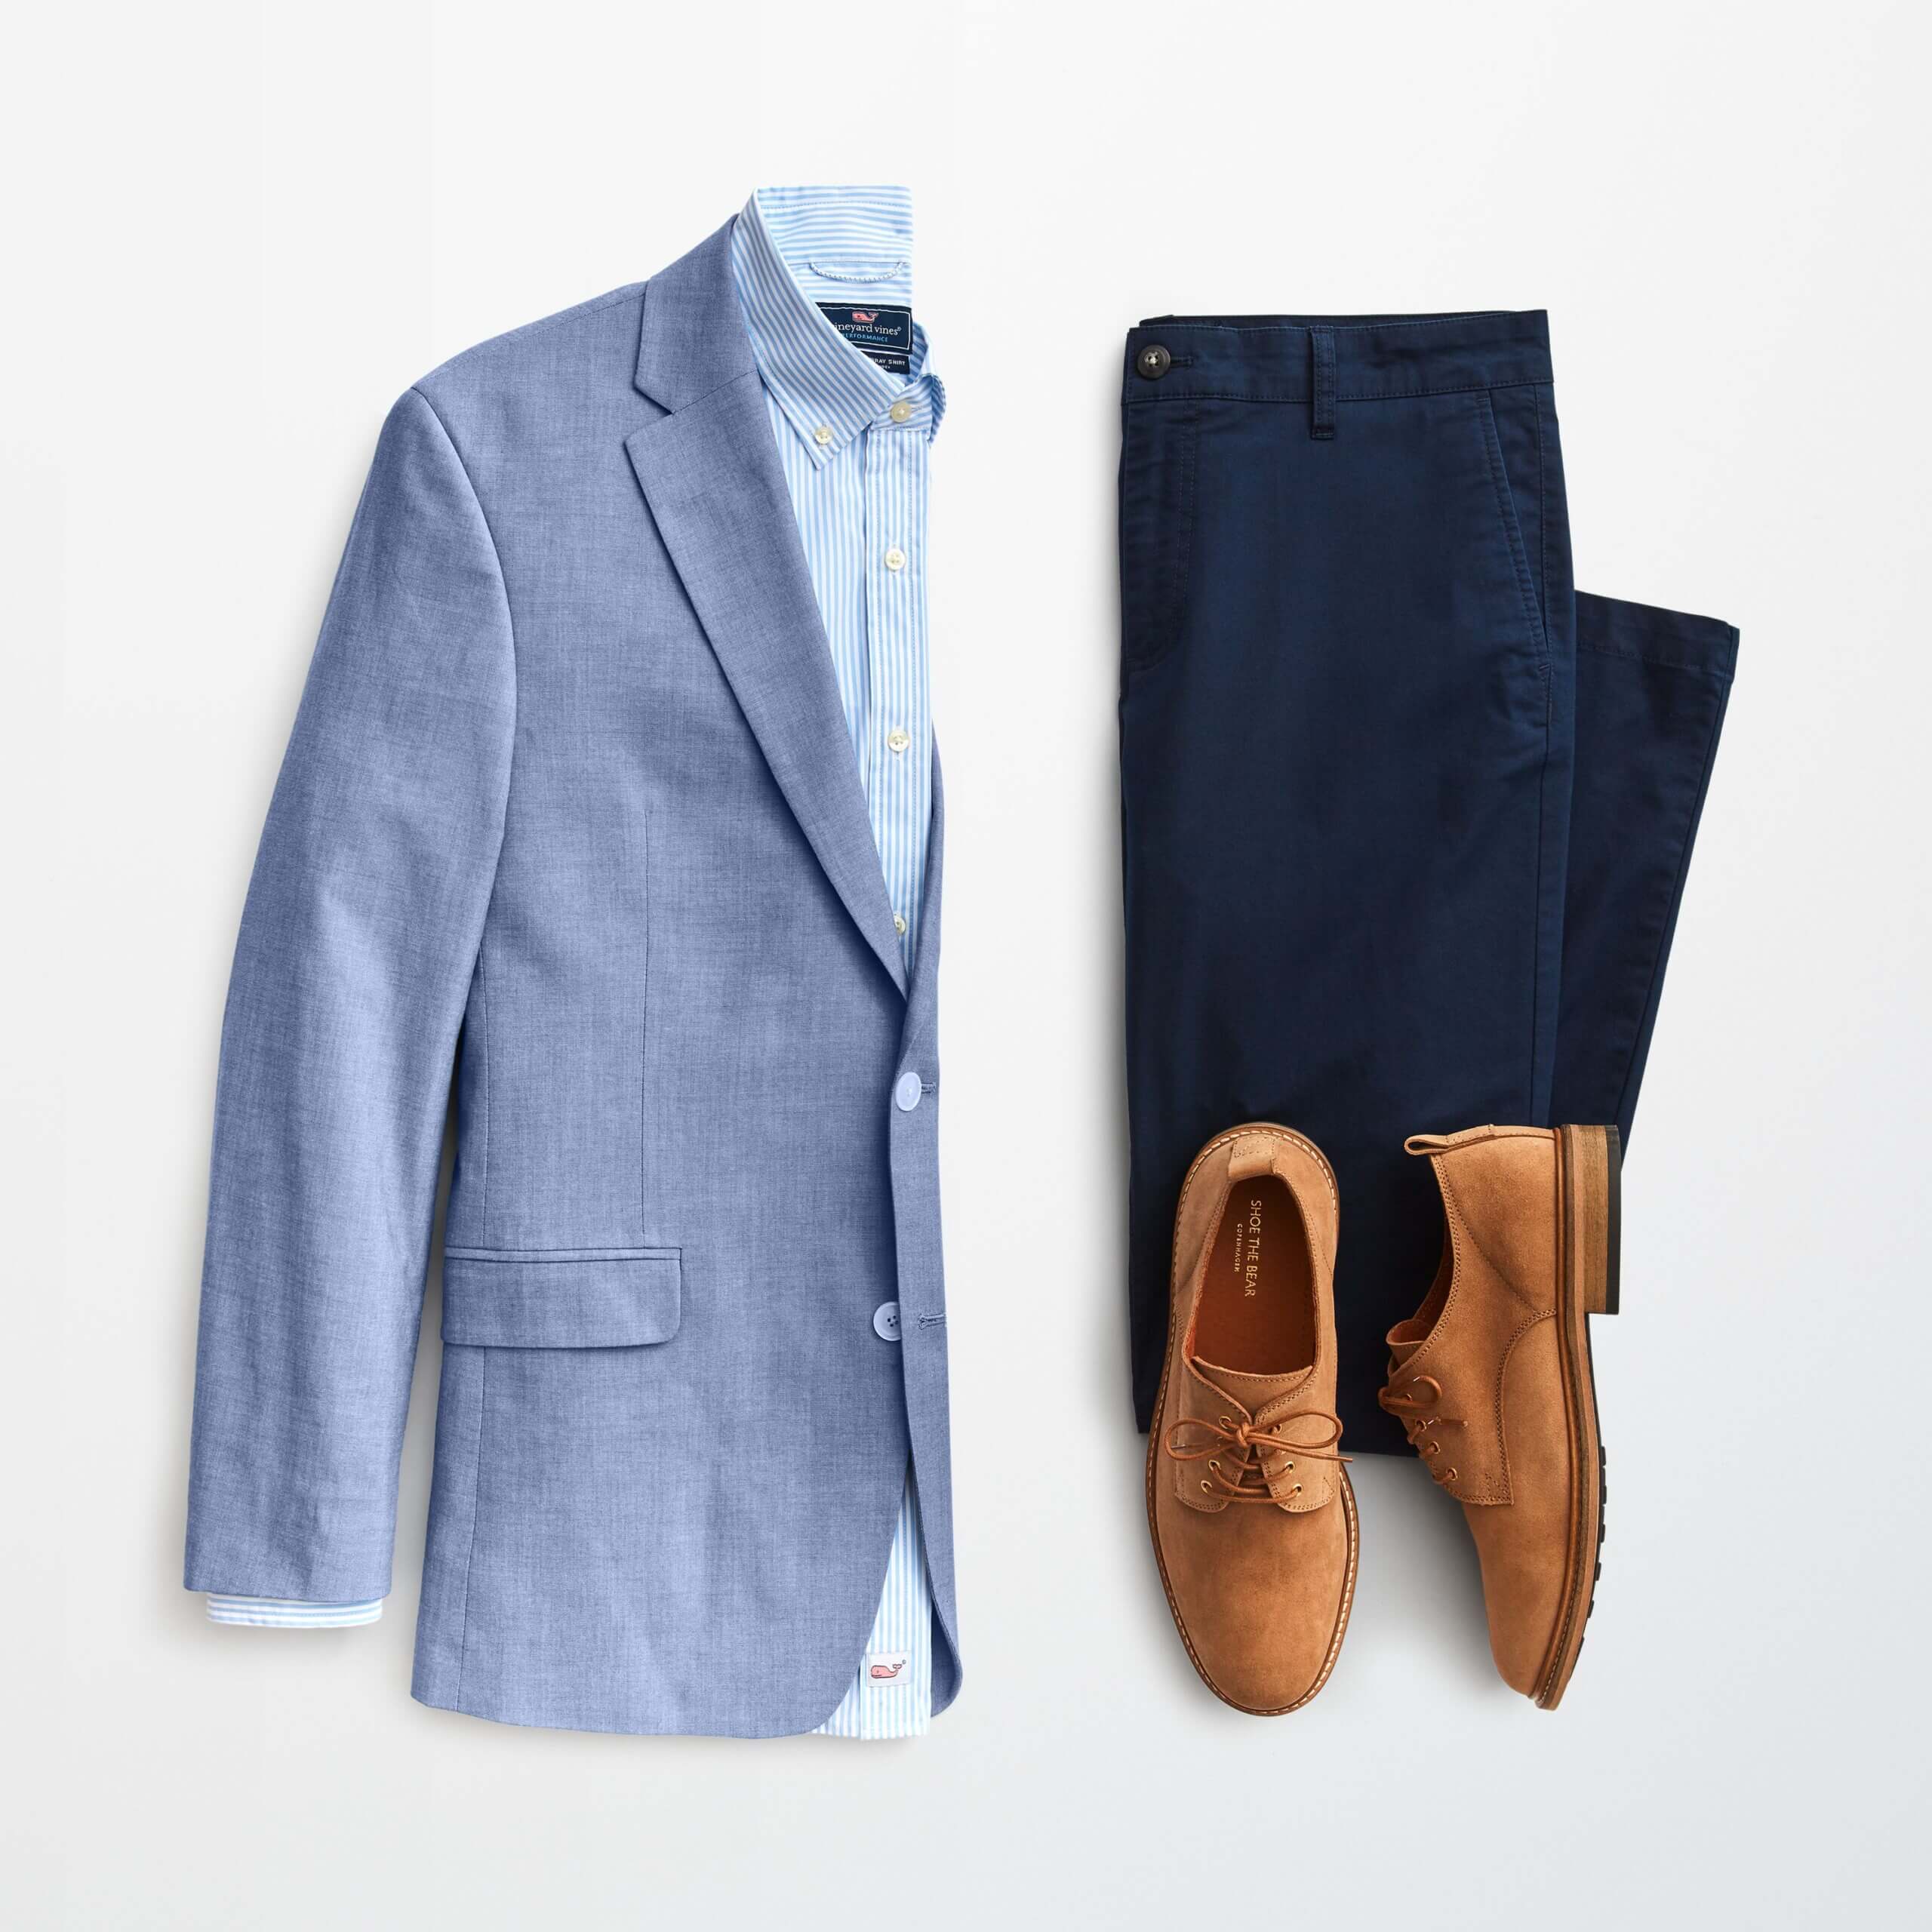 Stitch Fix men's outfit laydown featuring blue blazer over blue dress shirt and navy pants. 